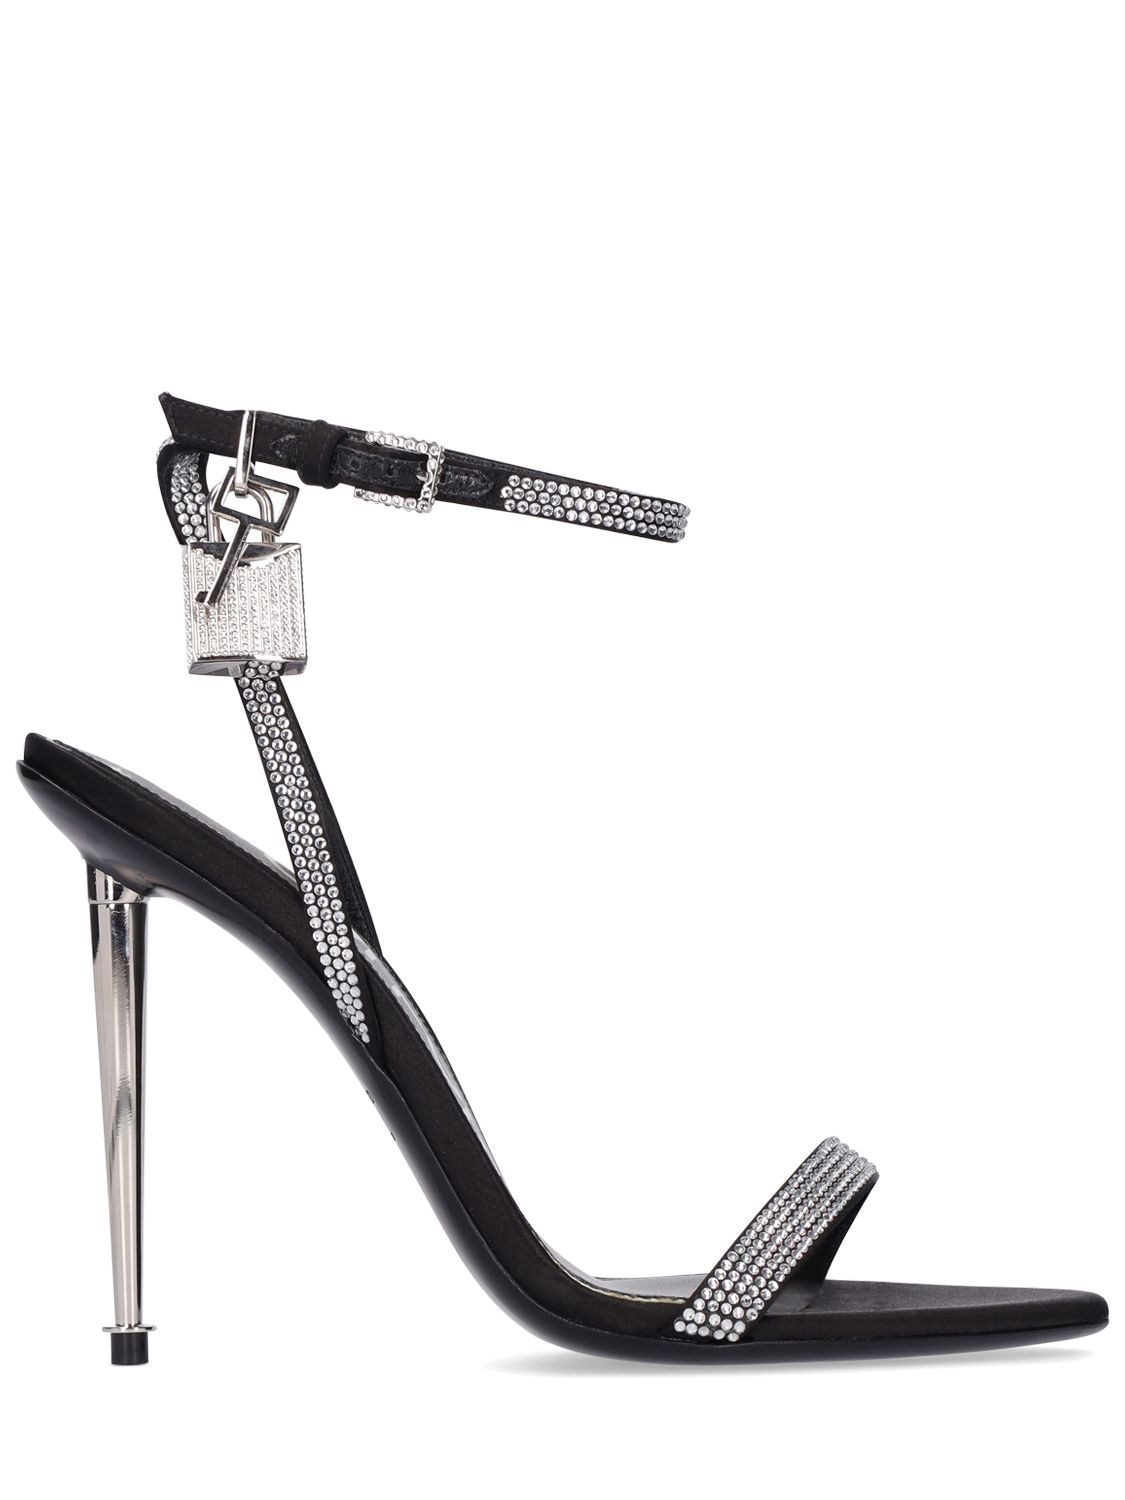 TOM FORD 105mm Leather & Crystal Sandals